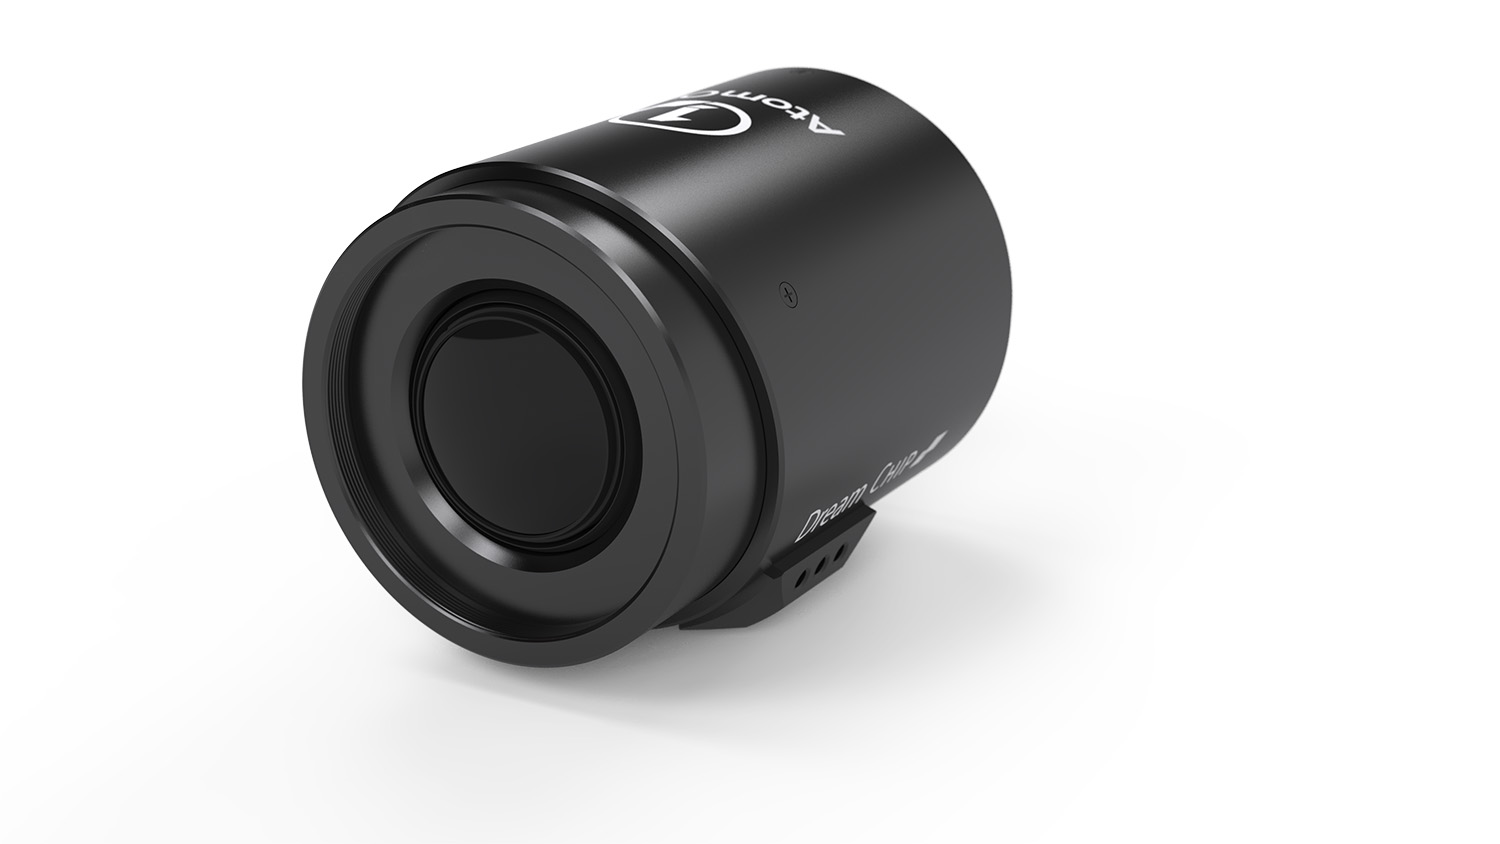 Product Image: AtomOne mini Zoom, front view; shows lens, full item and partial branding